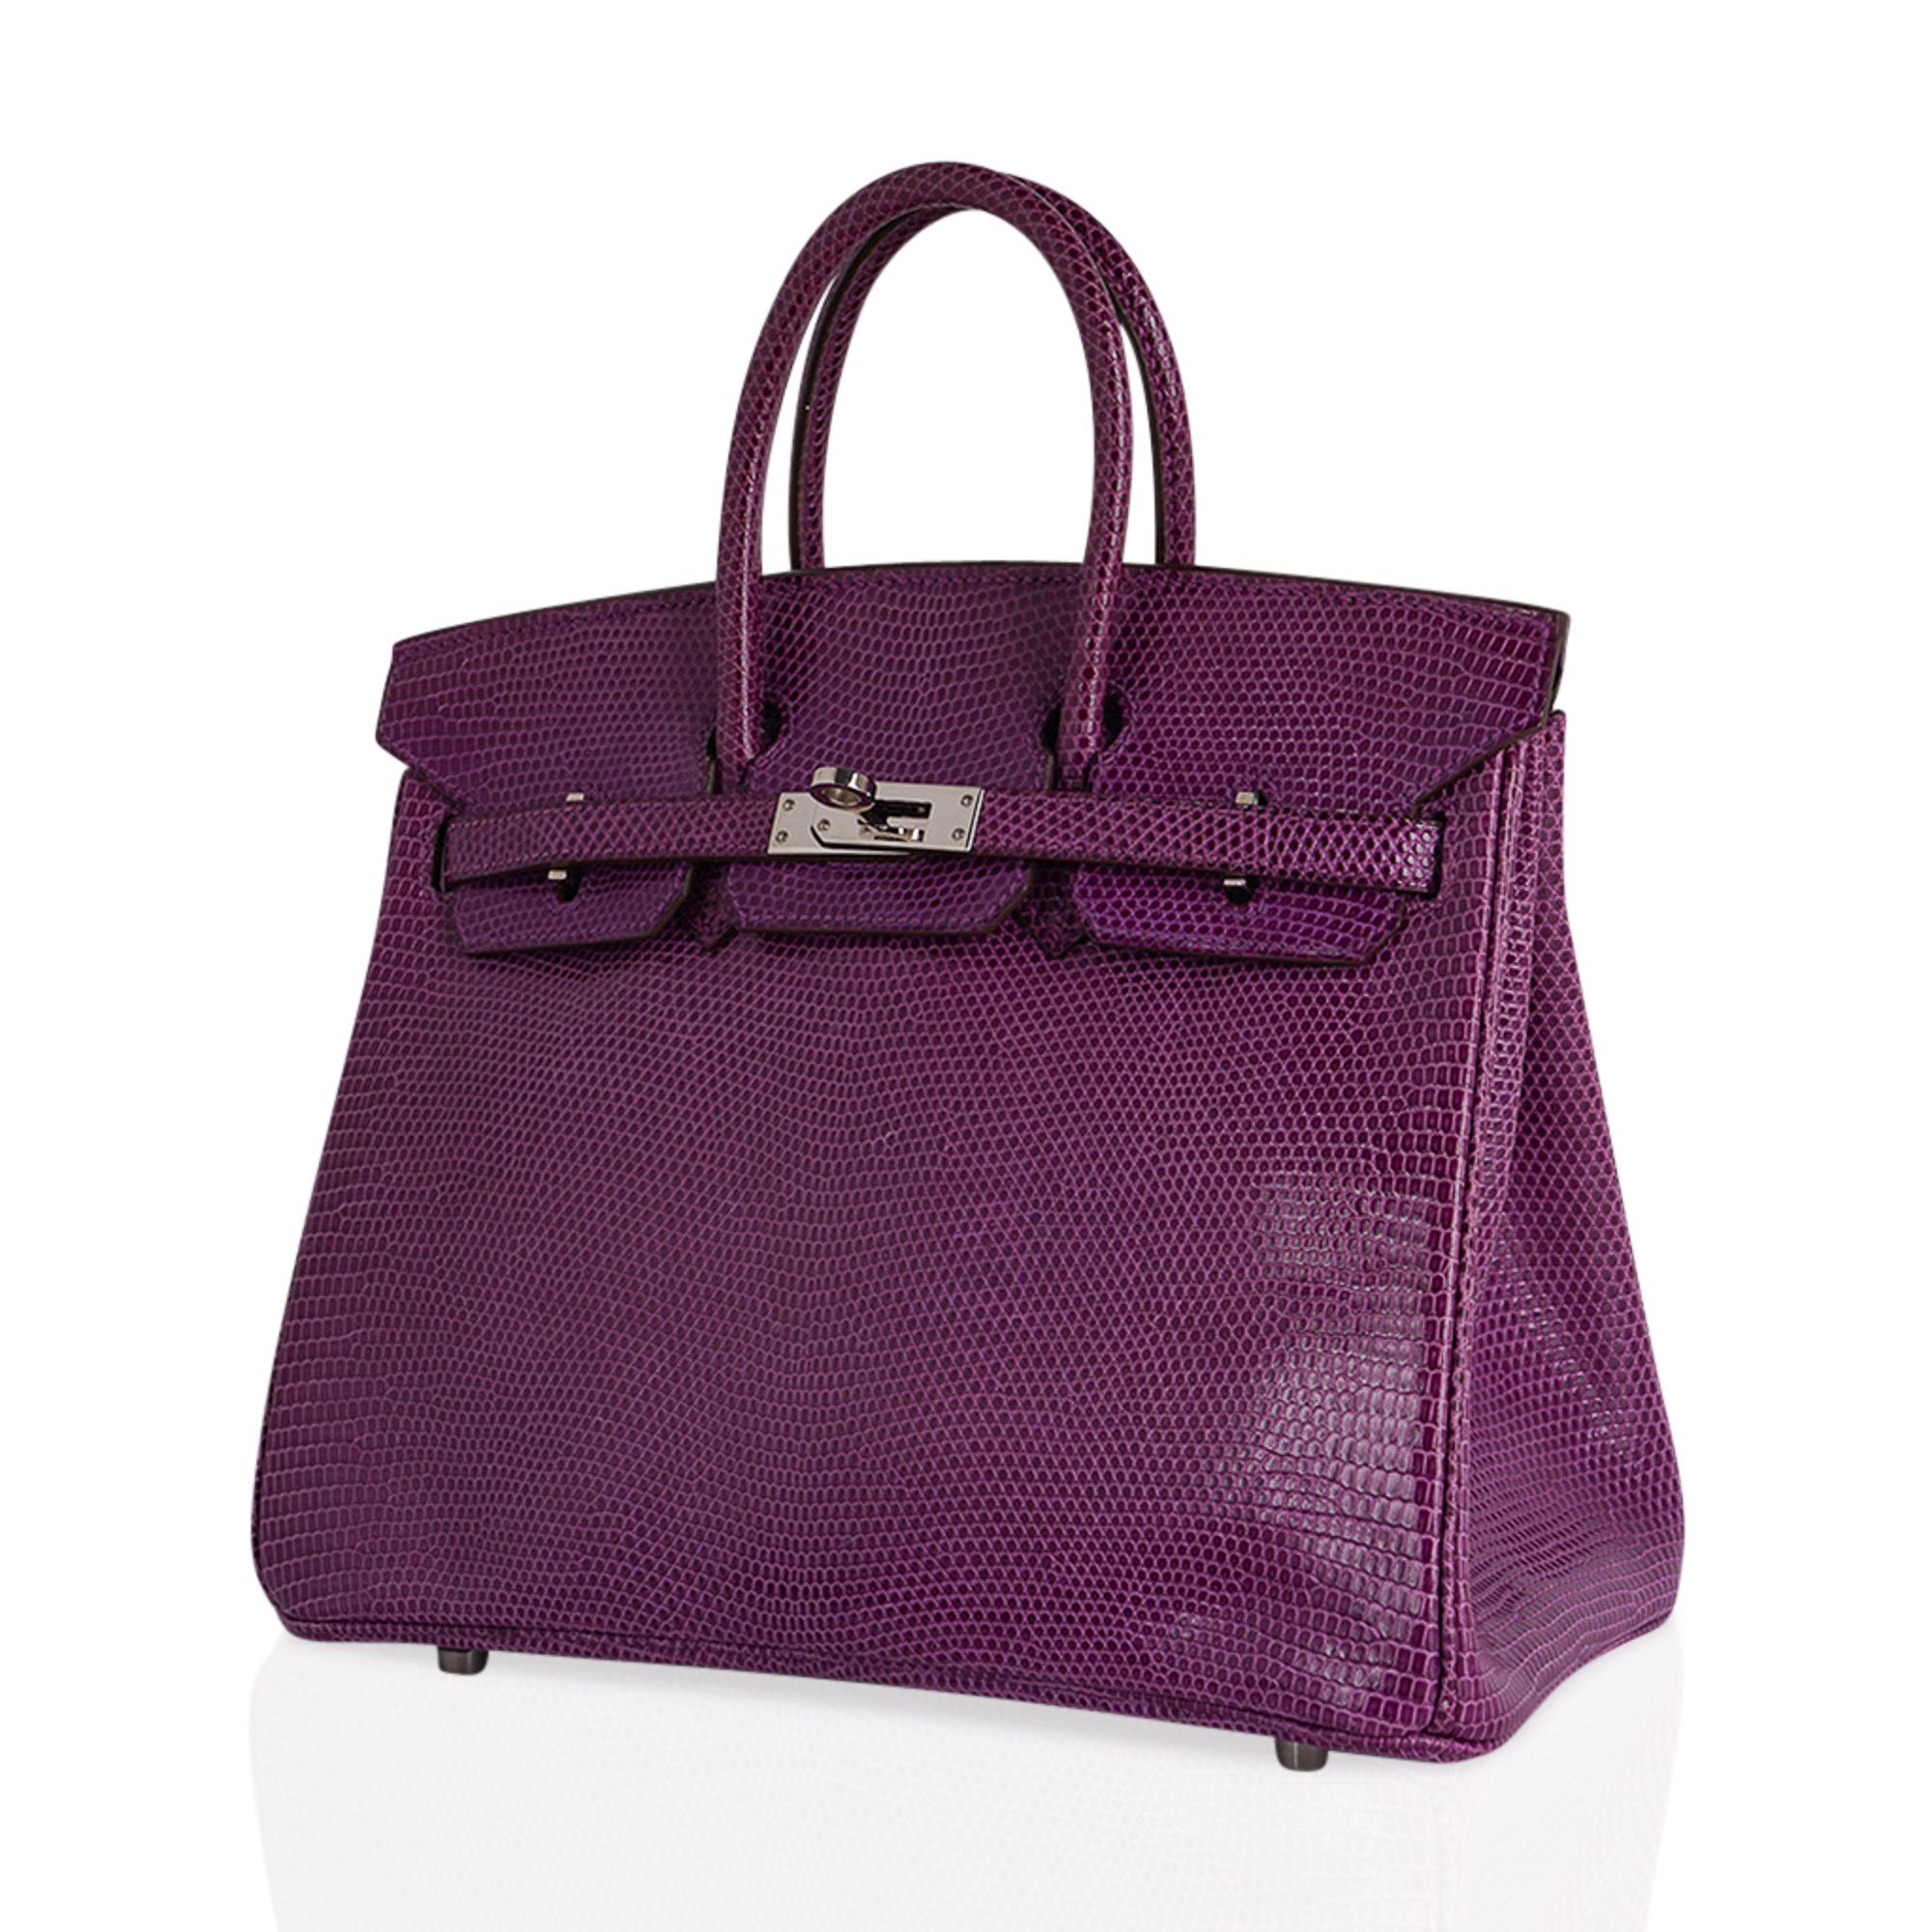 Mightychic offers an Hermes Birkin 25 bag featured in rich Violet lizard.
This stunning jewel toned purple Hermes Birkin bag is timeless and perfect for year round wear
Comes with the lock and keys in the clochette and sleeper.
Beautiful and in Like